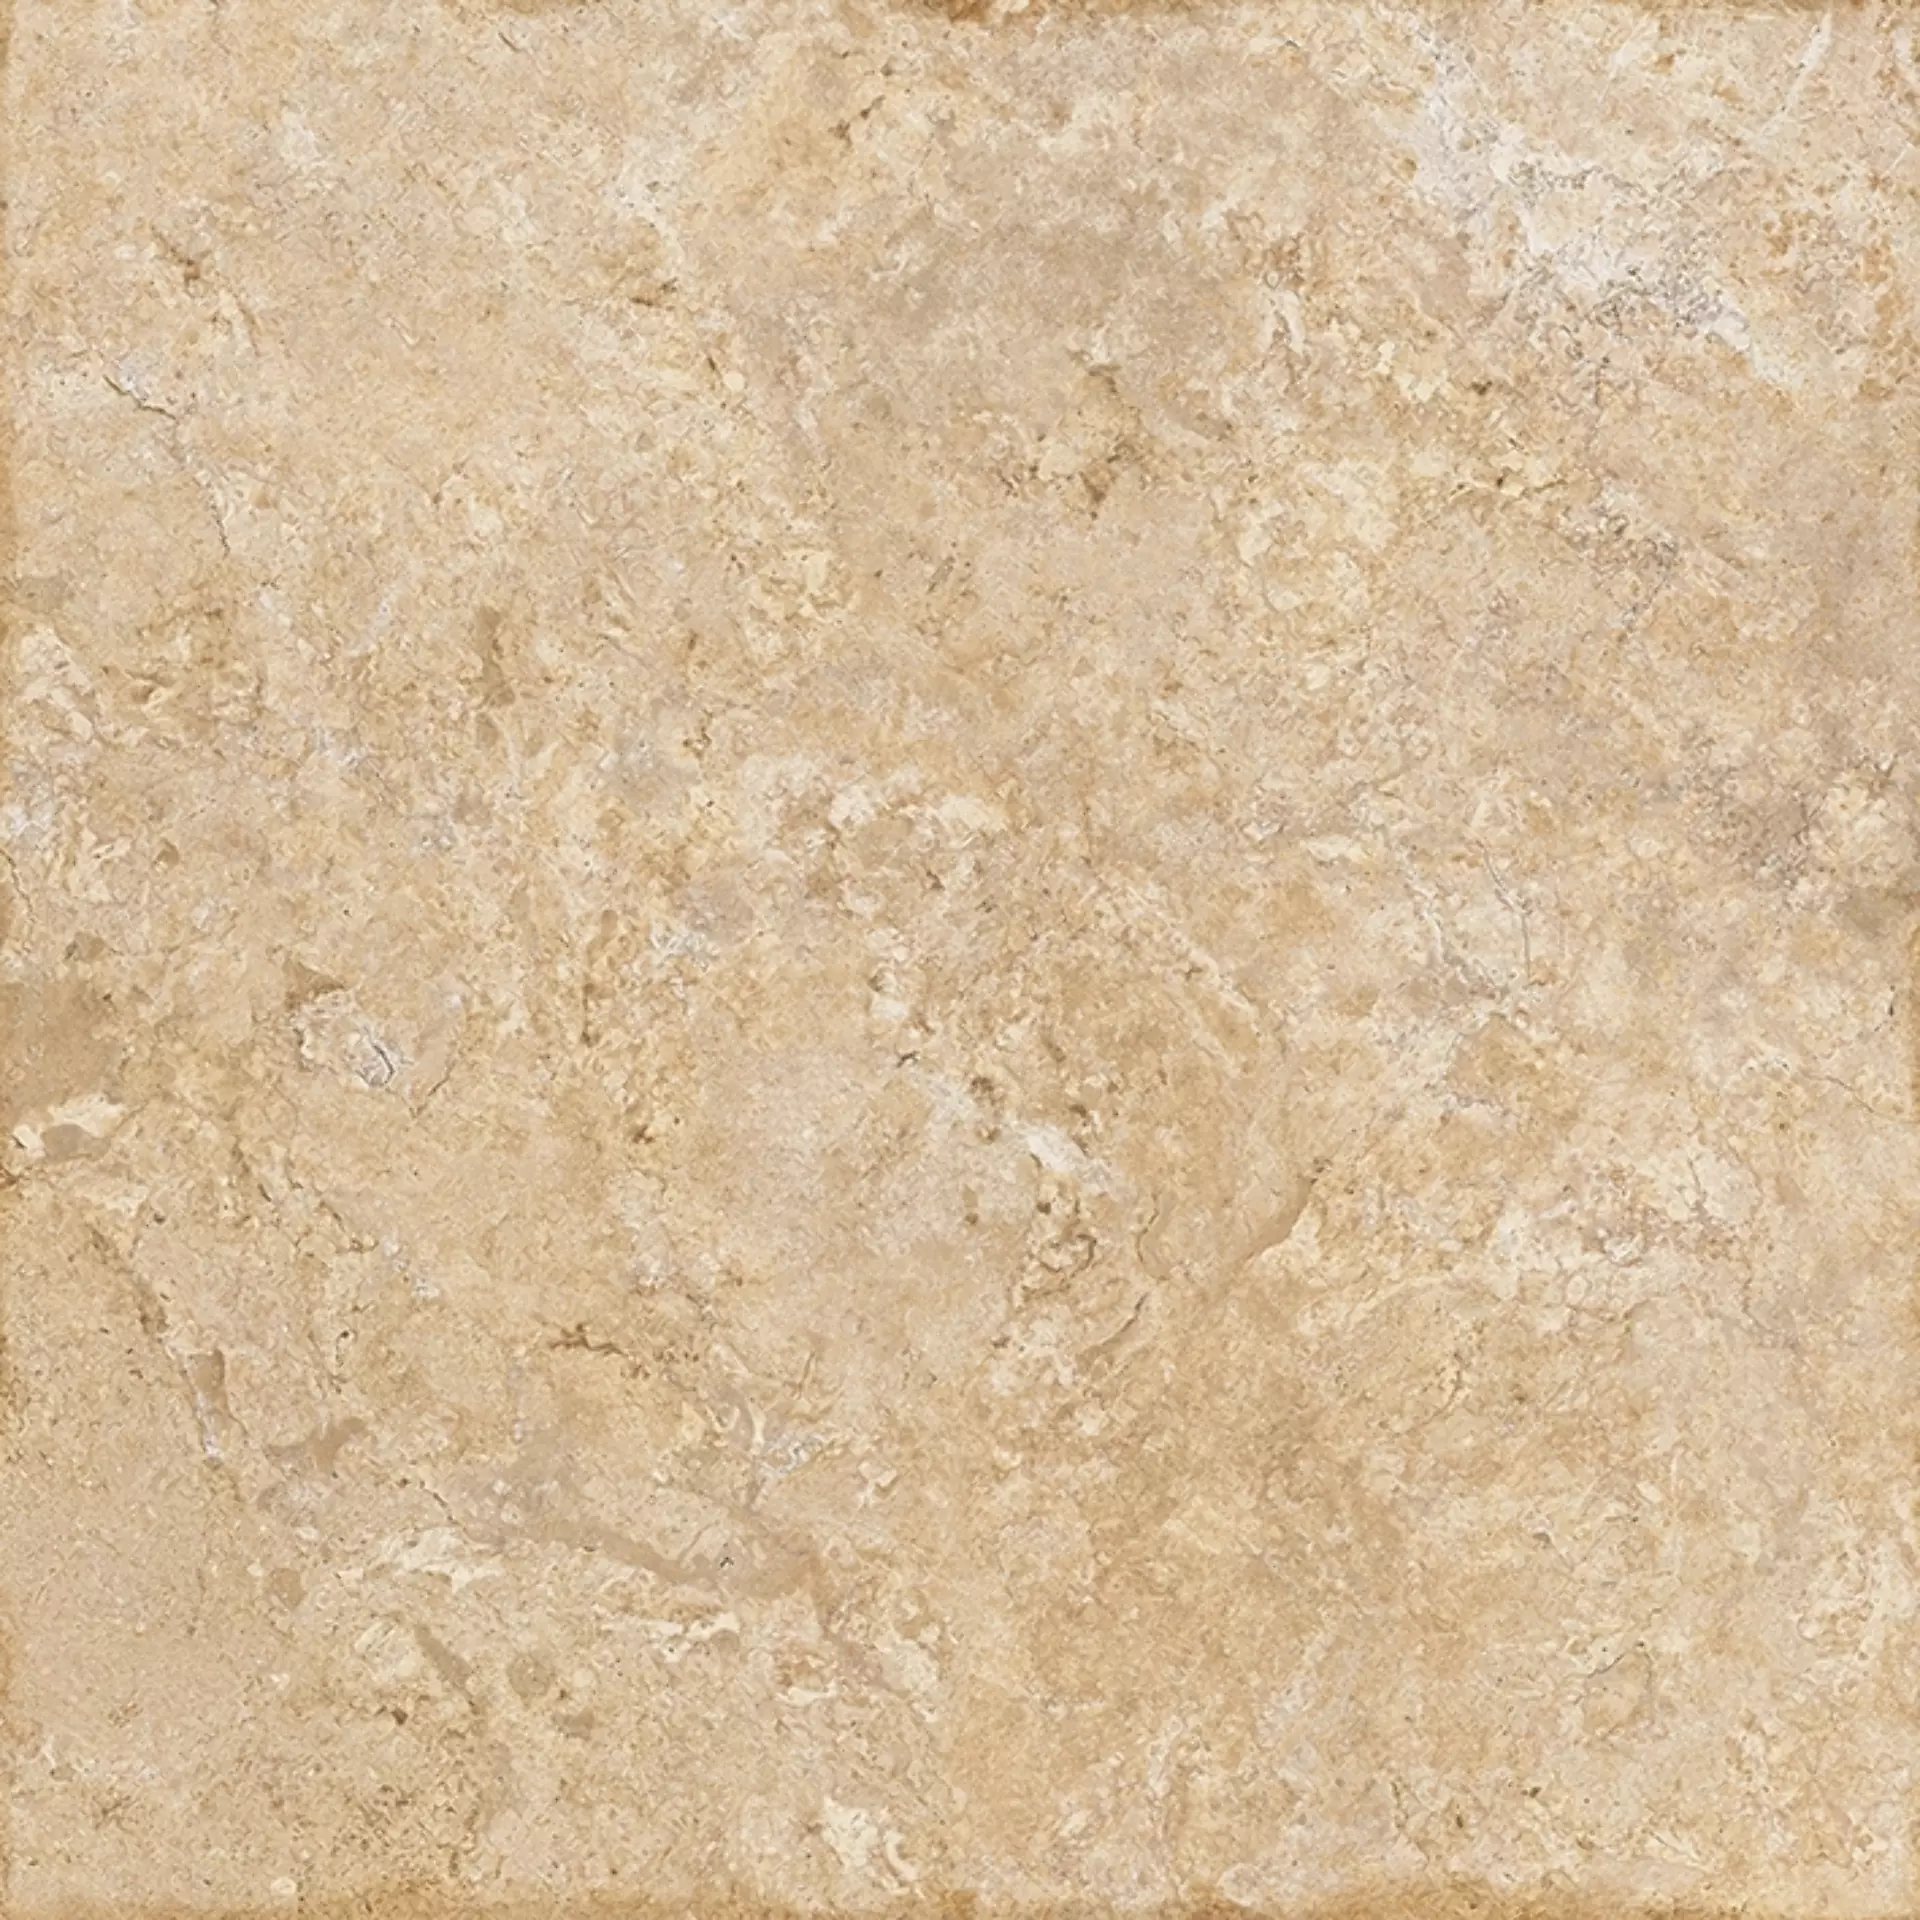 Sichenia Amboise Oro Smooth Chipped Edge 0192665 60x60cm rectified 10mm